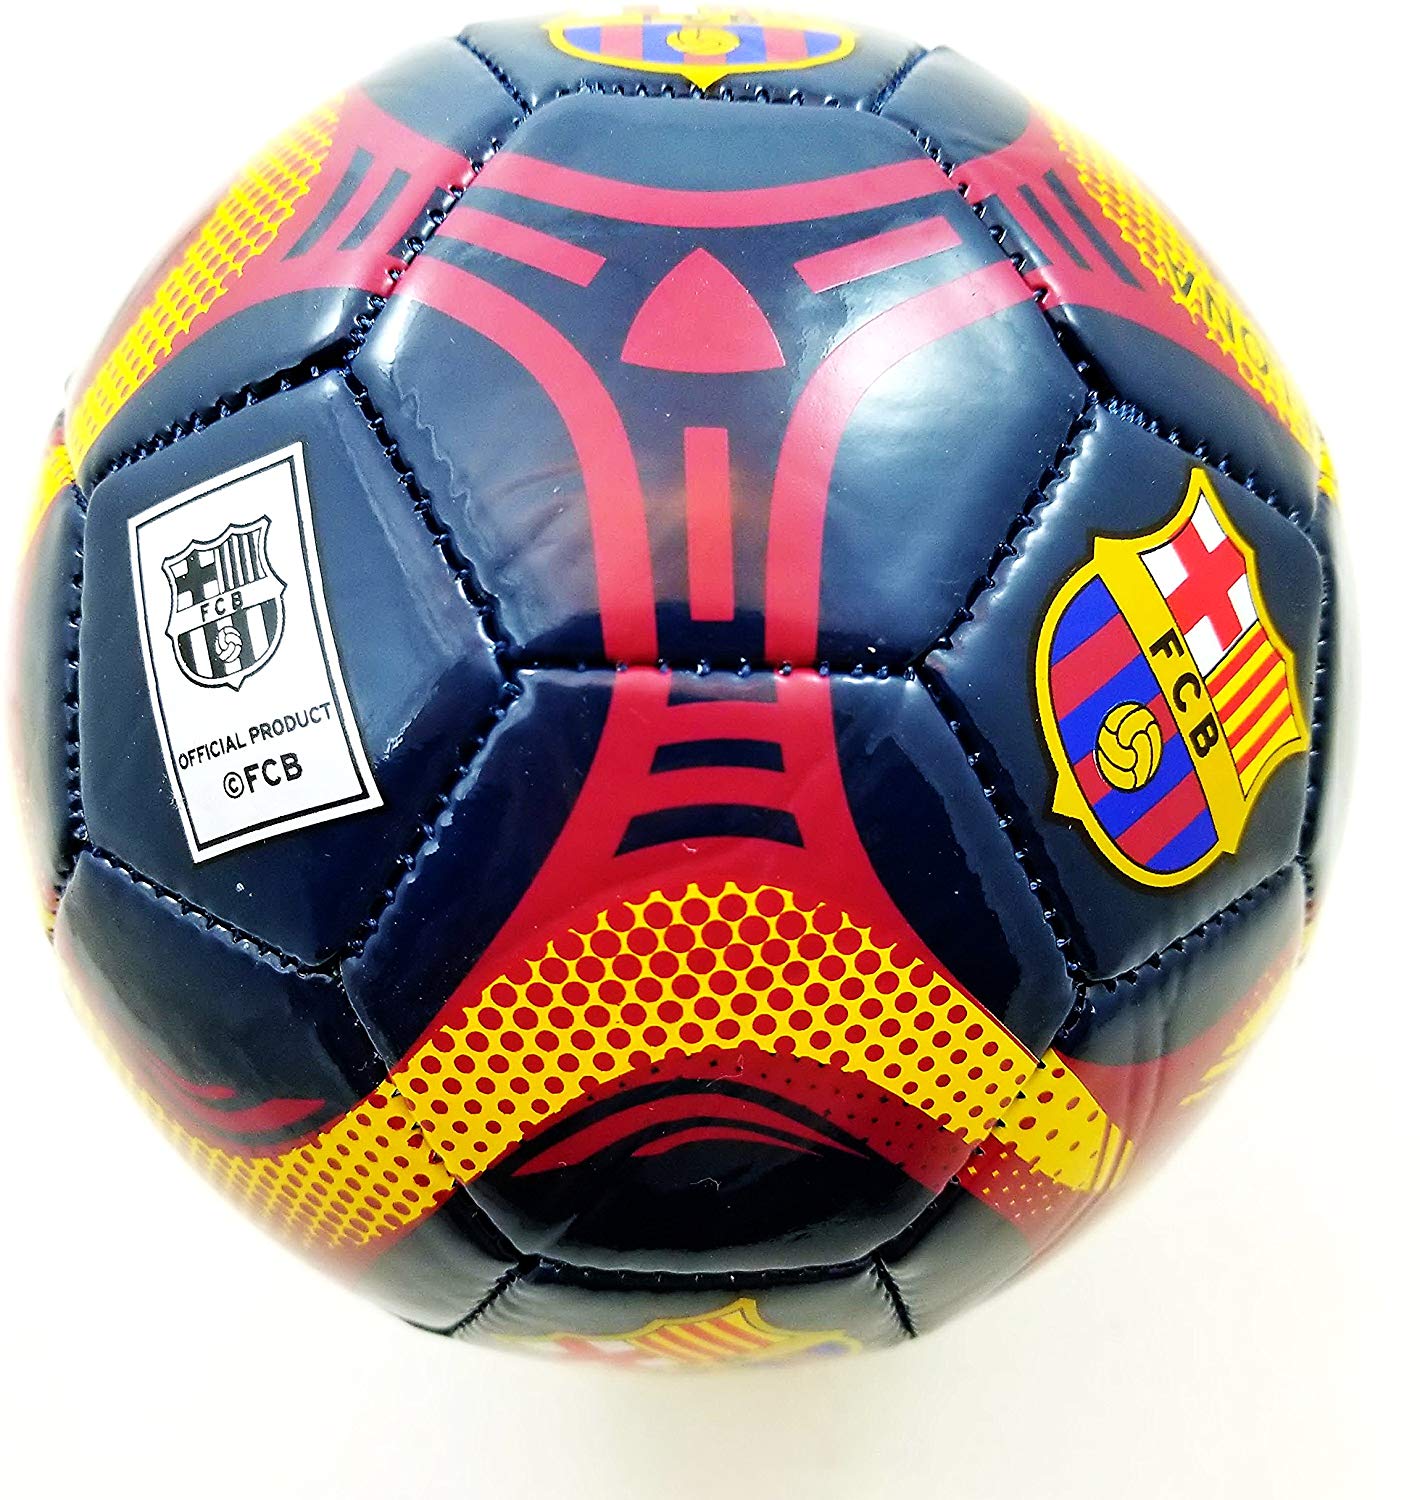 Icon Sports FC Barcelona Soccer Ball Officially Licensed Ball Size 2 01-5 - image 2 of 2